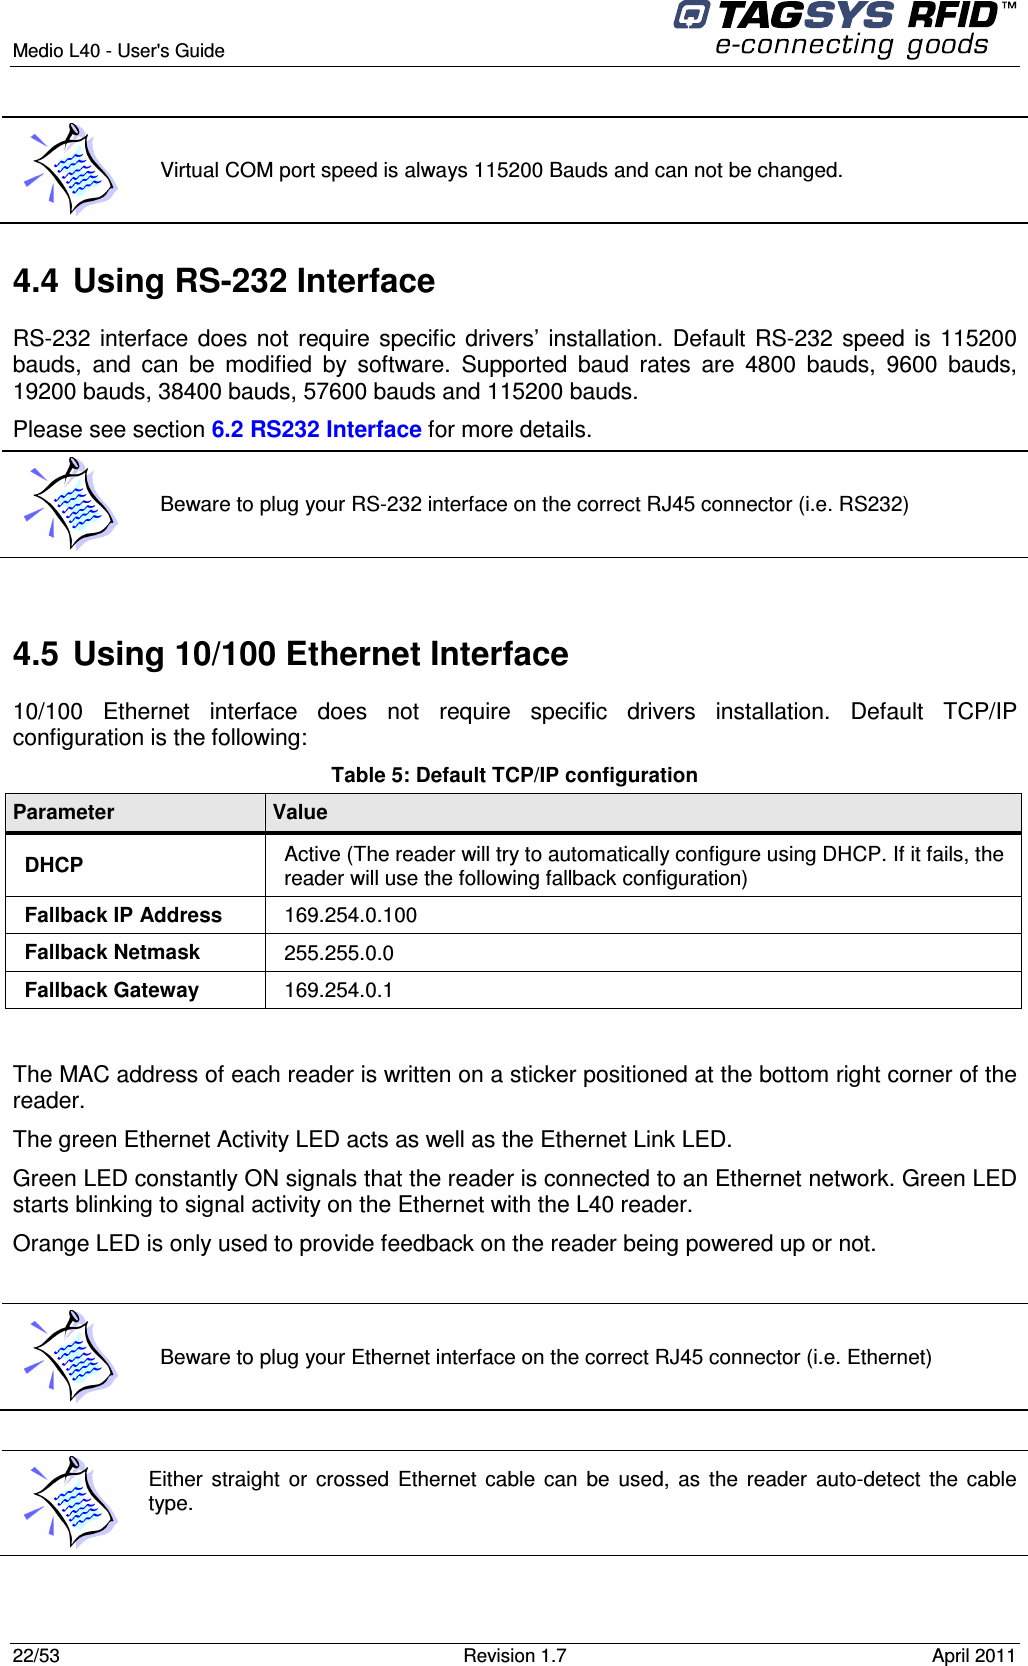  Medio L40 - User&apos;s Guide     22/53  Revision 1.7  April 2011   4.4  Using RS-232 Interface RS-232 interface does not require specific drivers’ installation. Default RS-232 speed is 115200 bauds,  and  can  be  modified  by  software.  Supported  baud  rates  are  4800  bauds,  9600  bauds, 19200 bauds, 38400 bauds, 57600 bauds and 115200 bauds. Please see section 6.2 RS232 Interface for more details.  4.5  Using 10/100 Ethernet Interface 10/100  Ethernet  interface  does  not  require  specific  drivers  installation.  Default  TCP/IP configuration is the following: Table 5: Default TCP/IP configuration Parameter  Value DHCP  Active (The reader will try to automatically configure using DHCP. If it fails, the reader will use the following fallback configuration) Fallback IP Address  169.254.0.100 Fallback Netmask  255.255.0.0 Fallback Gateway  169.254.0.1  The MAC address of each reader is written on a sticker positioned at the bottom right corner of the reader. The green Ethernet Activity LED acts as well as the Ethernet Link LED. Green LED constantly ON signals that the reader is connected to an Ethernet network. Green LED starts blinking to signal activity on the Ethernet with the L40 reader. Orange LED is only used to provide feedback on the reader being powered up or not.    Either straight  or  crossed  Ethernet cable  can  be  used,  as  the  reader auto-detect the cable type.    Virtual COM port speed is always 115200 Bauds and can not be changed.  Beware to plug your RS-232 interface on the correct RJ45 connector (i.e. RS232)  Beware to plug your Ethernet interface on the correct RJ45 connector (i.e. Ethernet) 